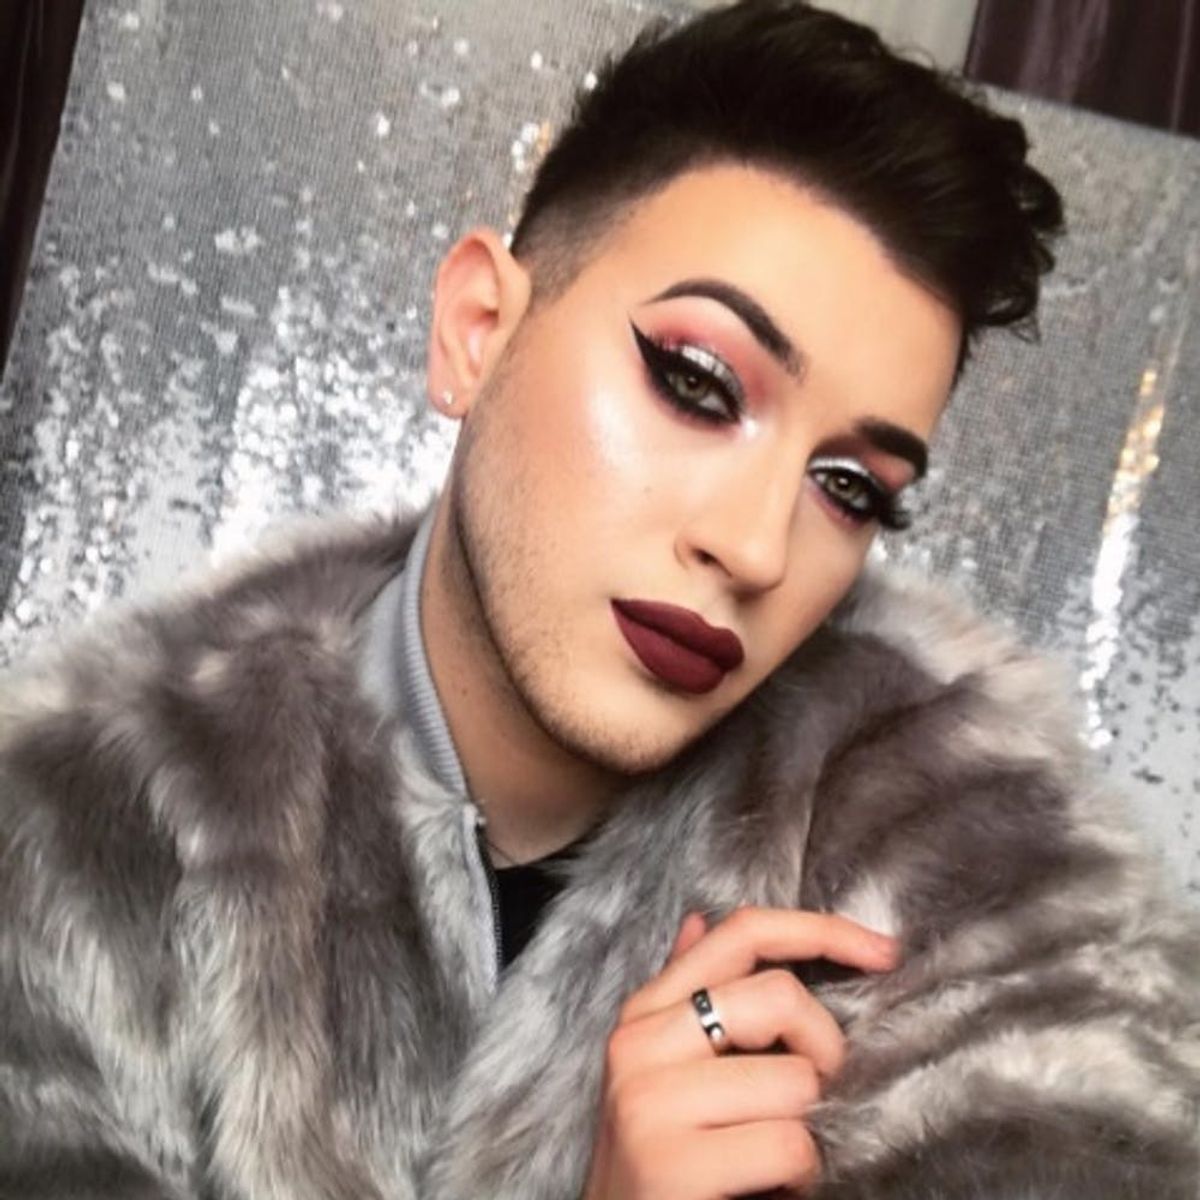 Maybelline Just Copied Cover Girl and Introduced Their First Male Makeup Model